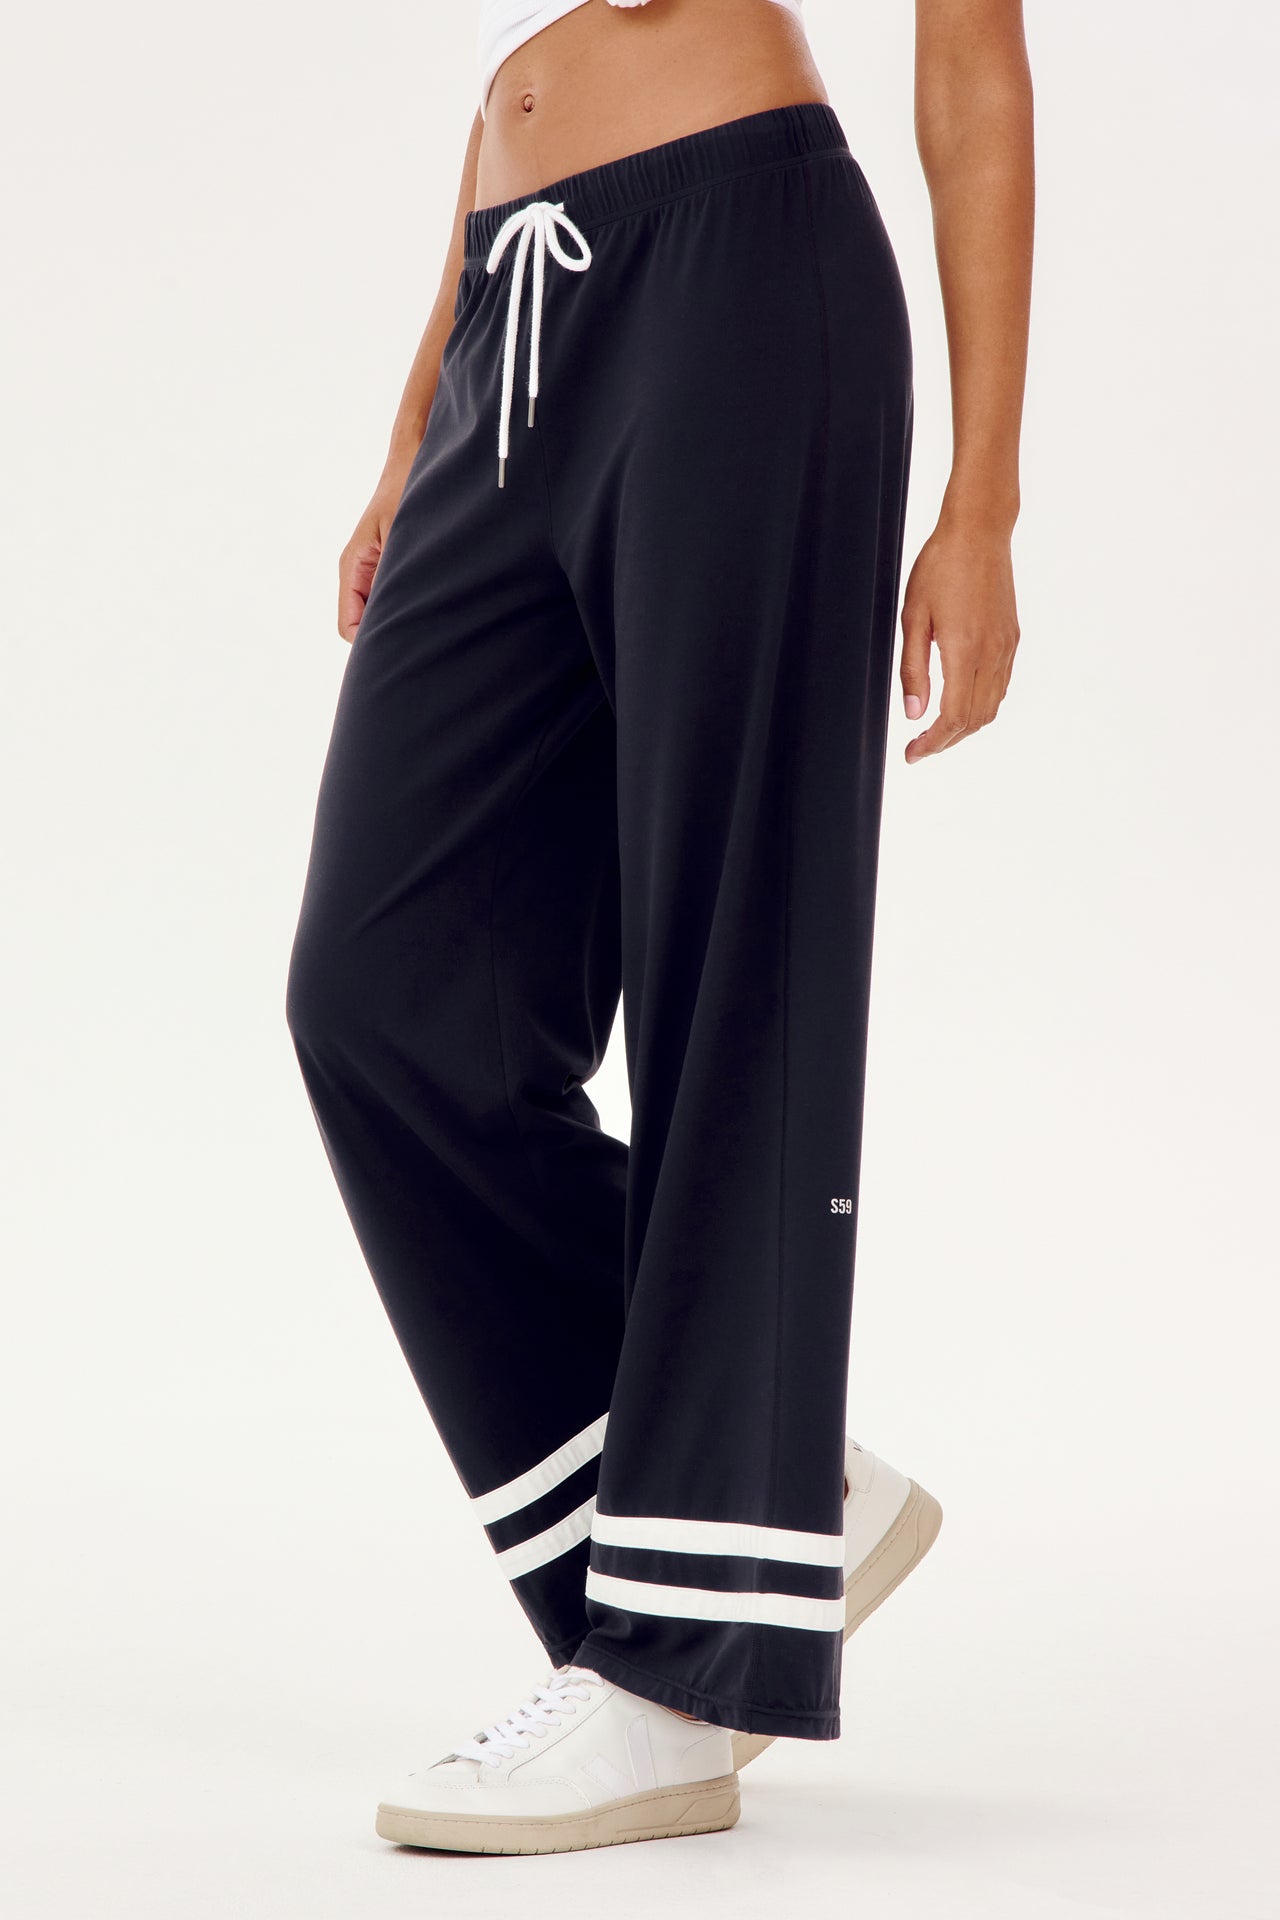 A woman wearing black SPLITS59 Quinn Airweight Wide Leg Pants with white stripes for comfort during her workout.